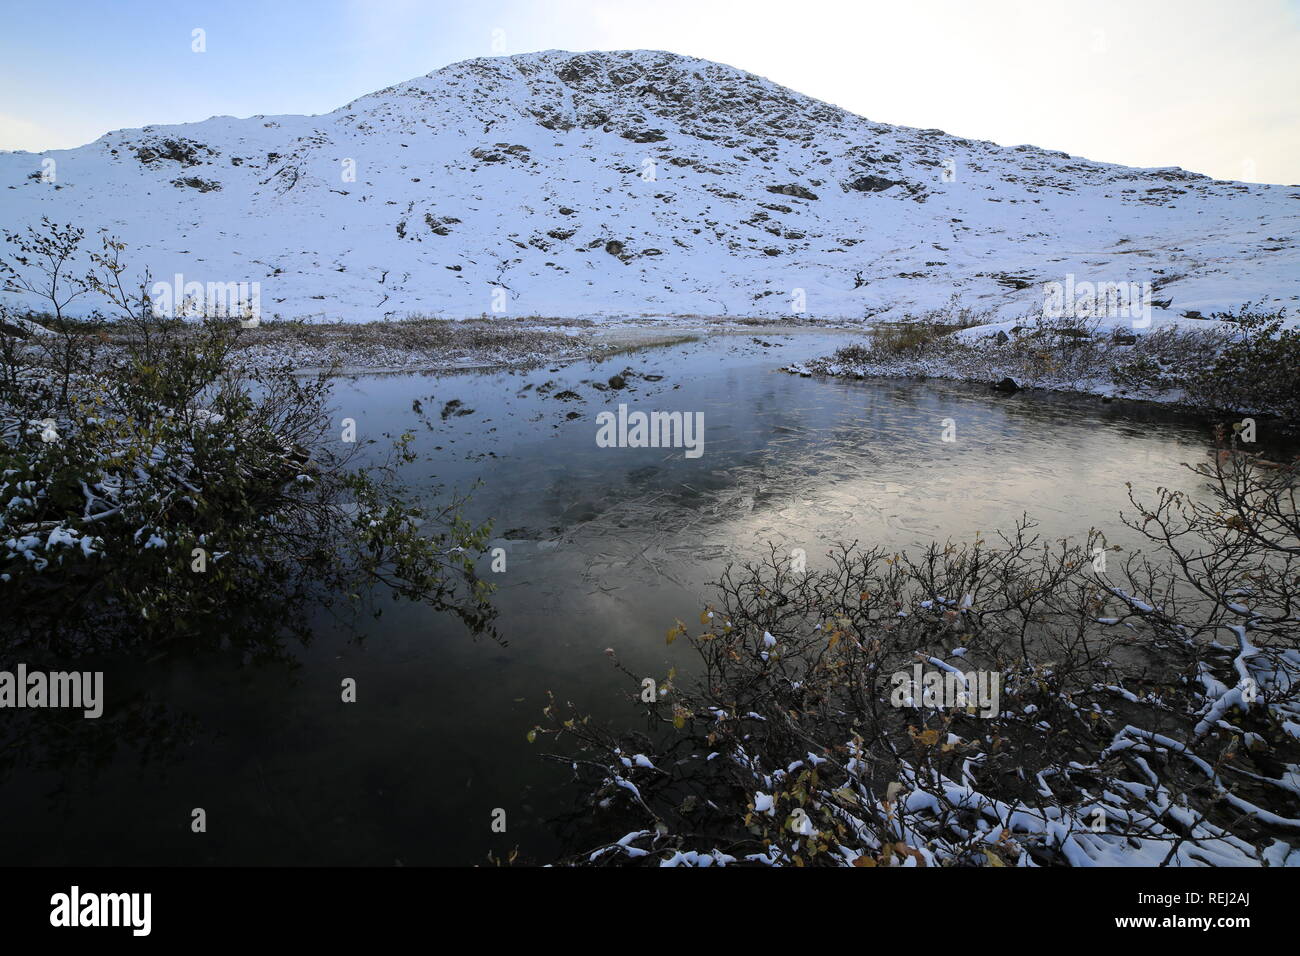 Small Lake Under A Mountain Peak Covered In Snow In Late Autumn Stock Photo